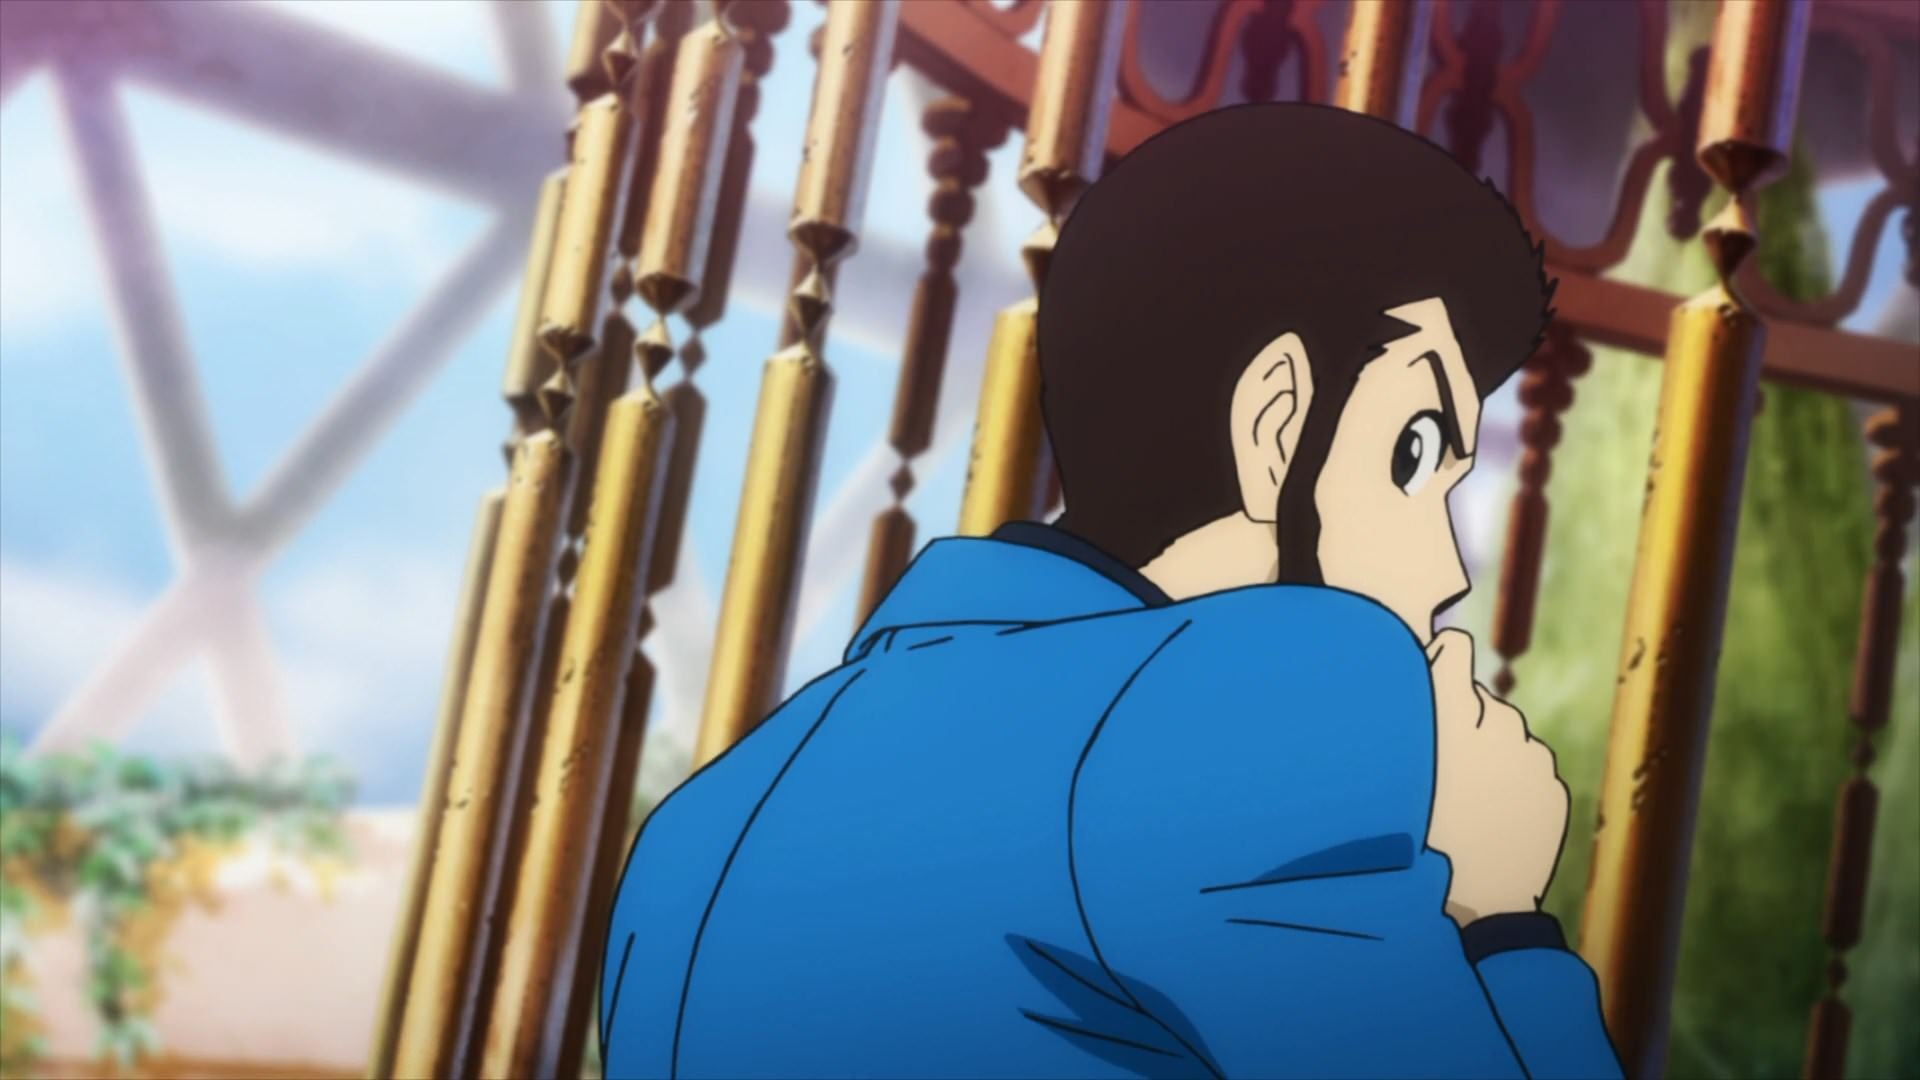 Lupin the Third anime, theory about the, 1920x1080 Full HD Desktop